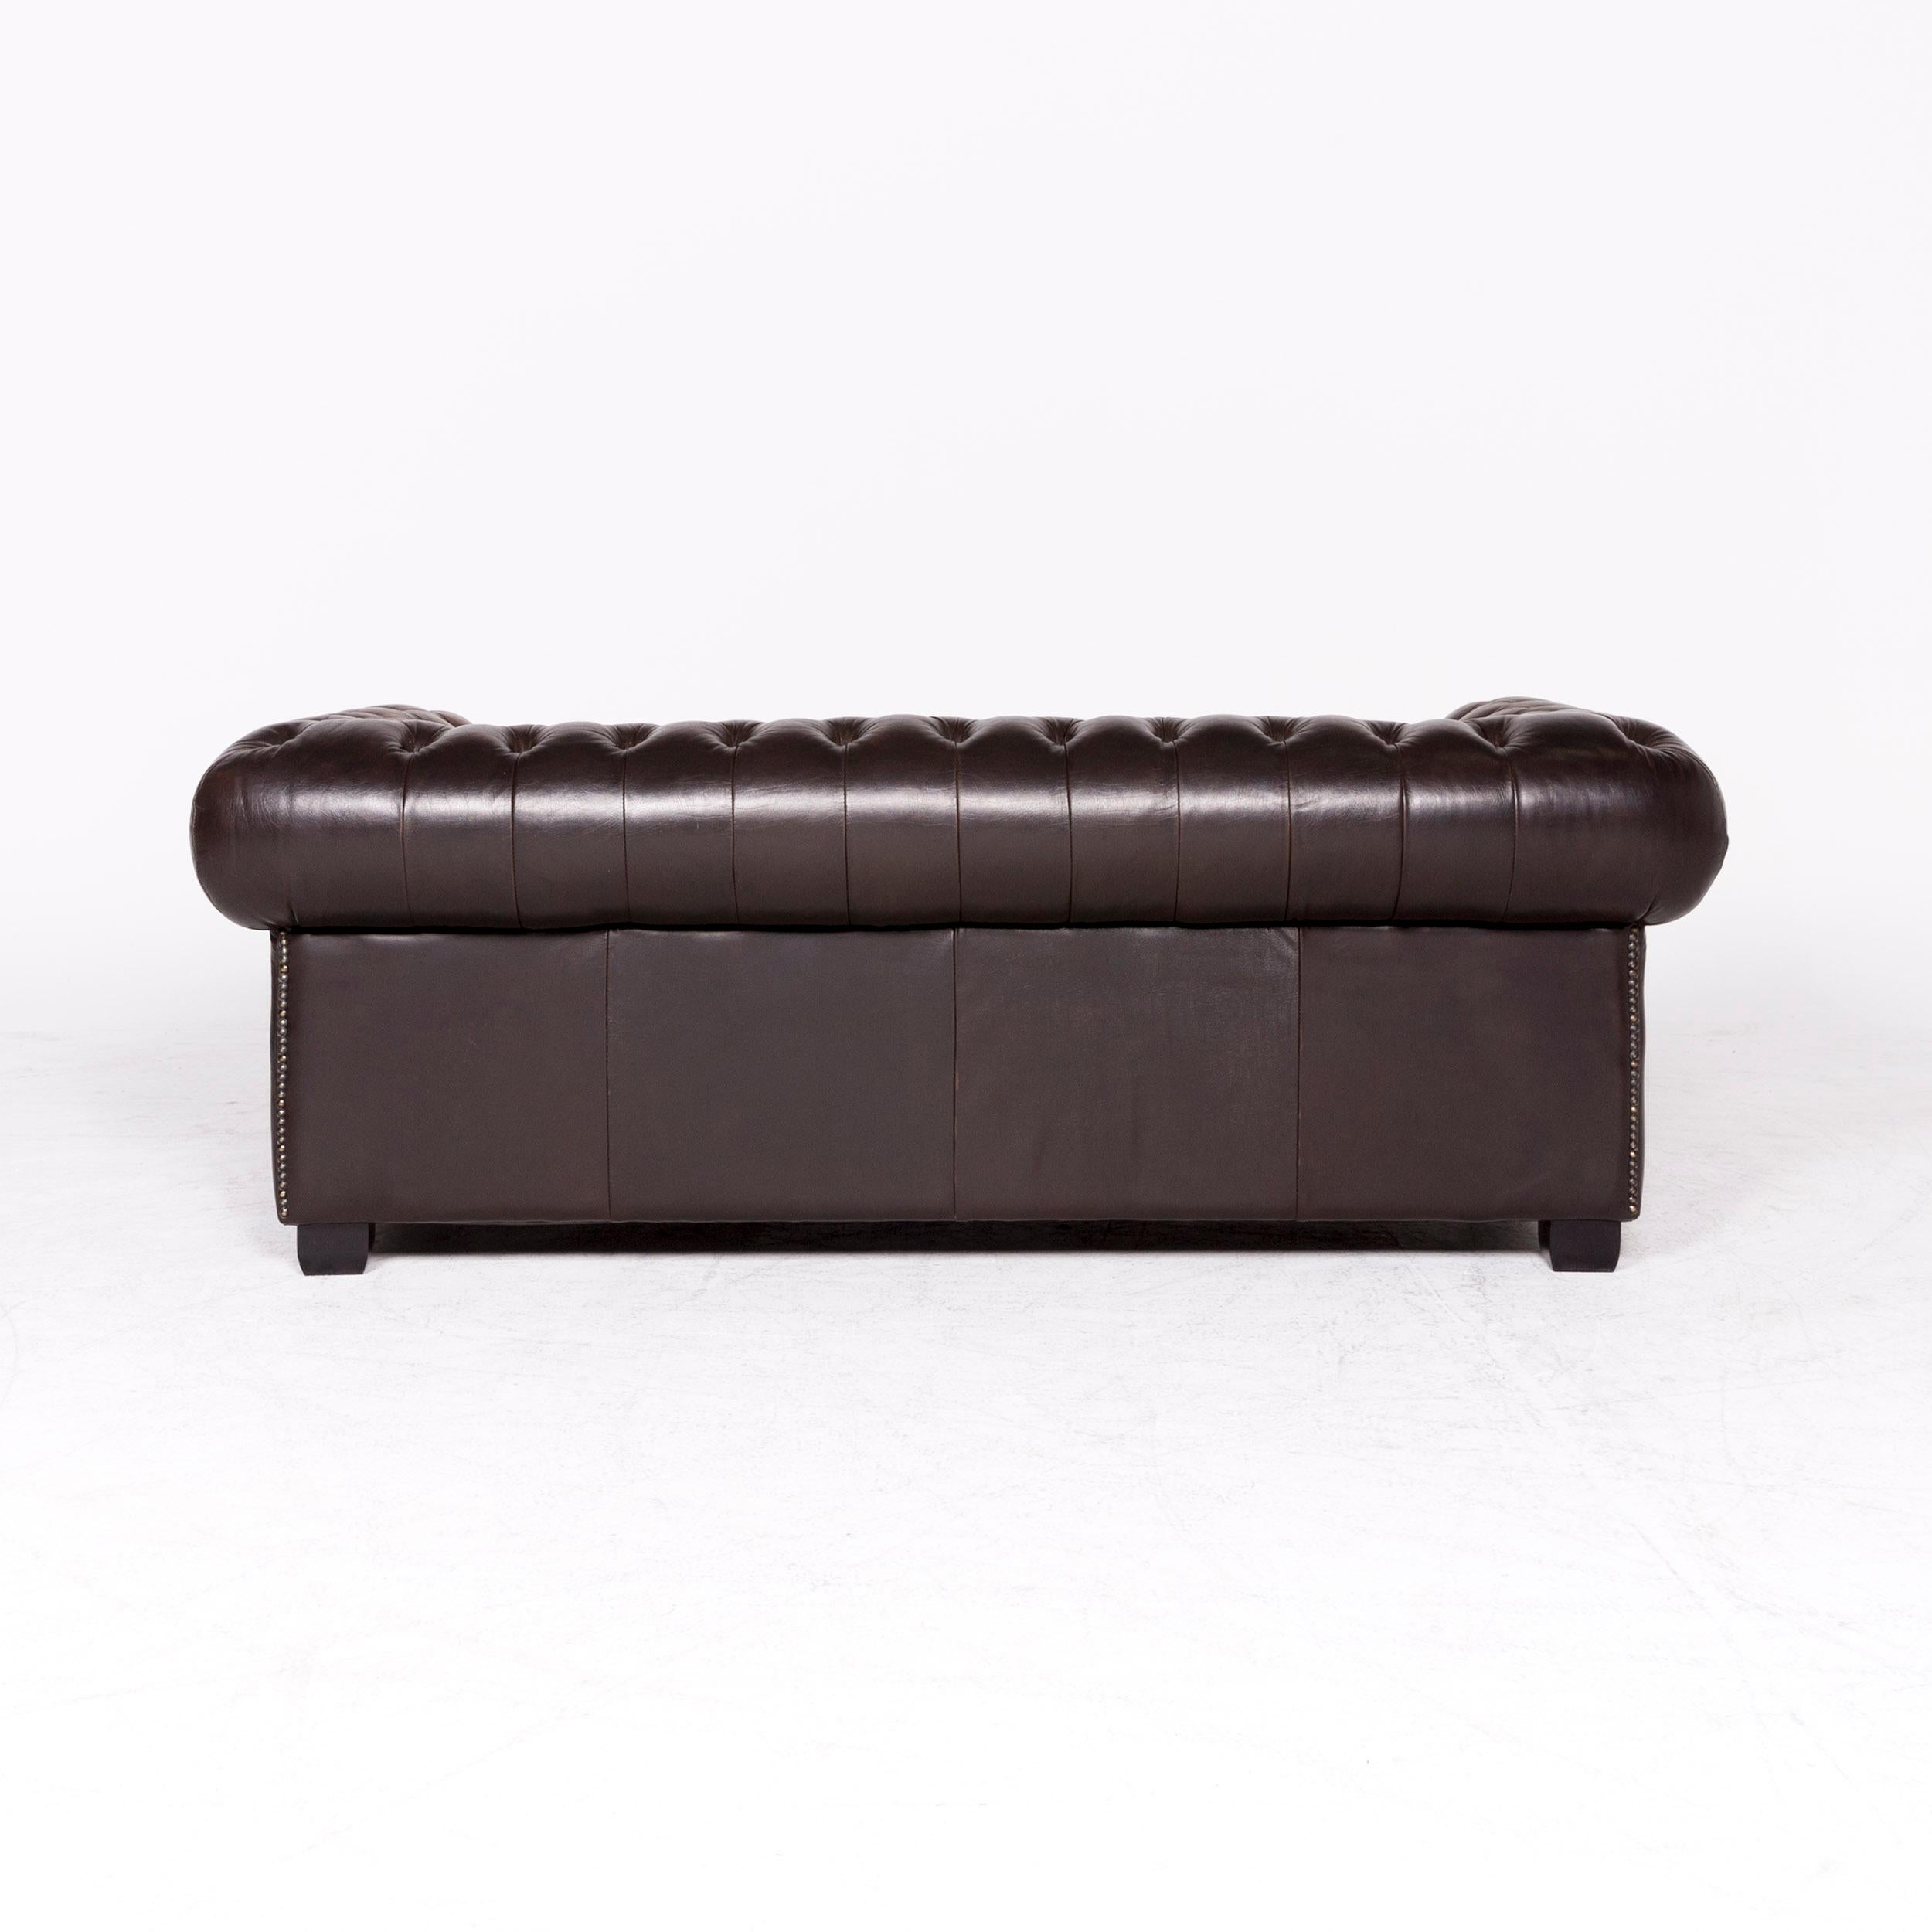 Chesterfield Leather Sofa Brown Genuine Leather Three-Seat Couch Vintage Retro 1